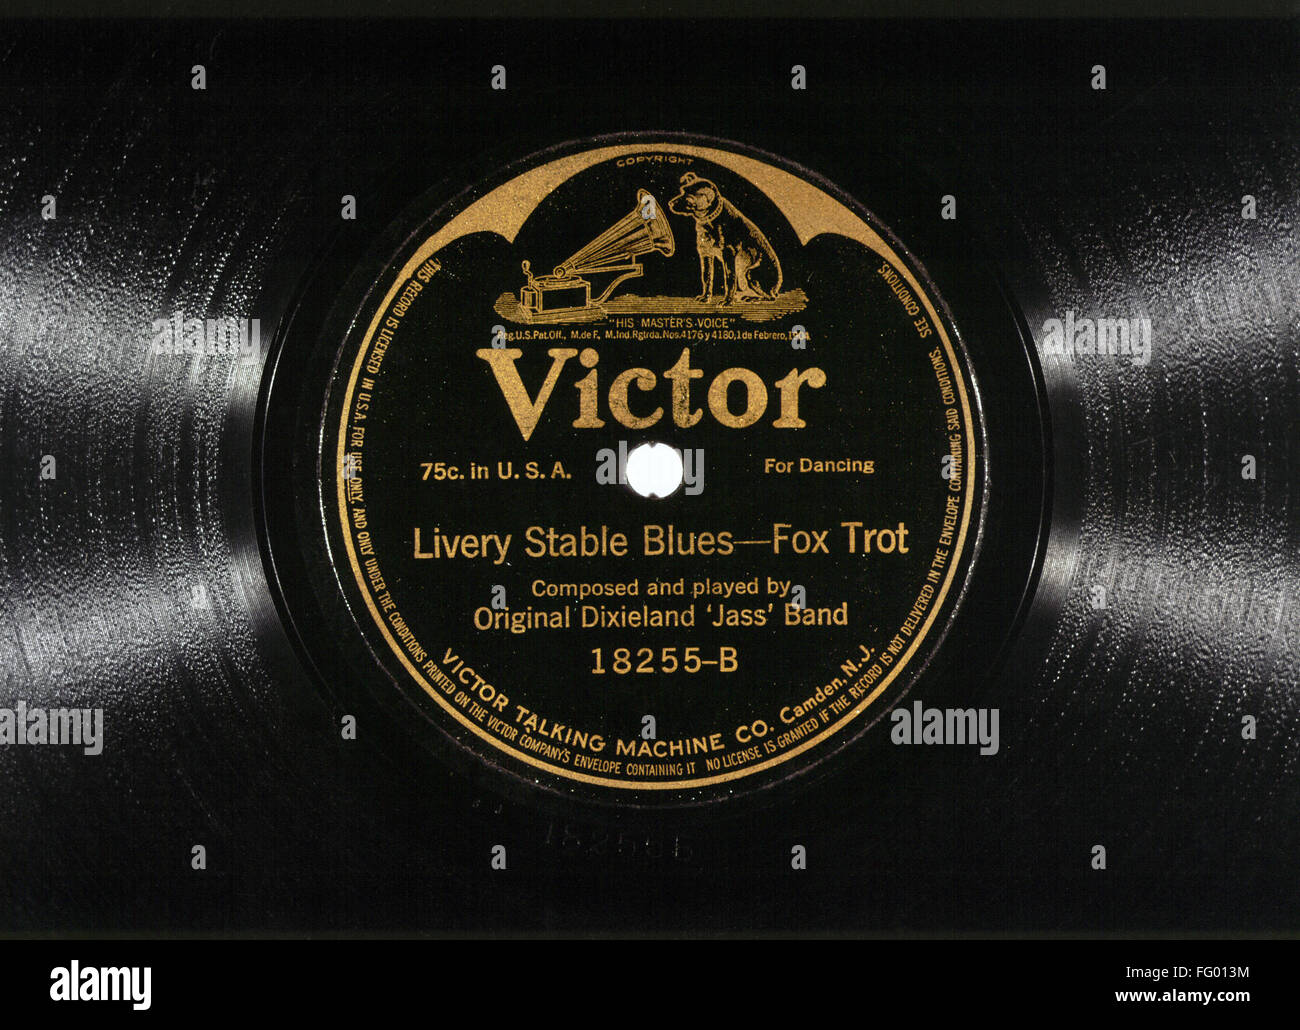 JAZZ RECORD, 1917. /nRecord of 'Livery Stable Blues' recorded by the Original Dixieland 'Jass' Band in 1917. Stock Photo